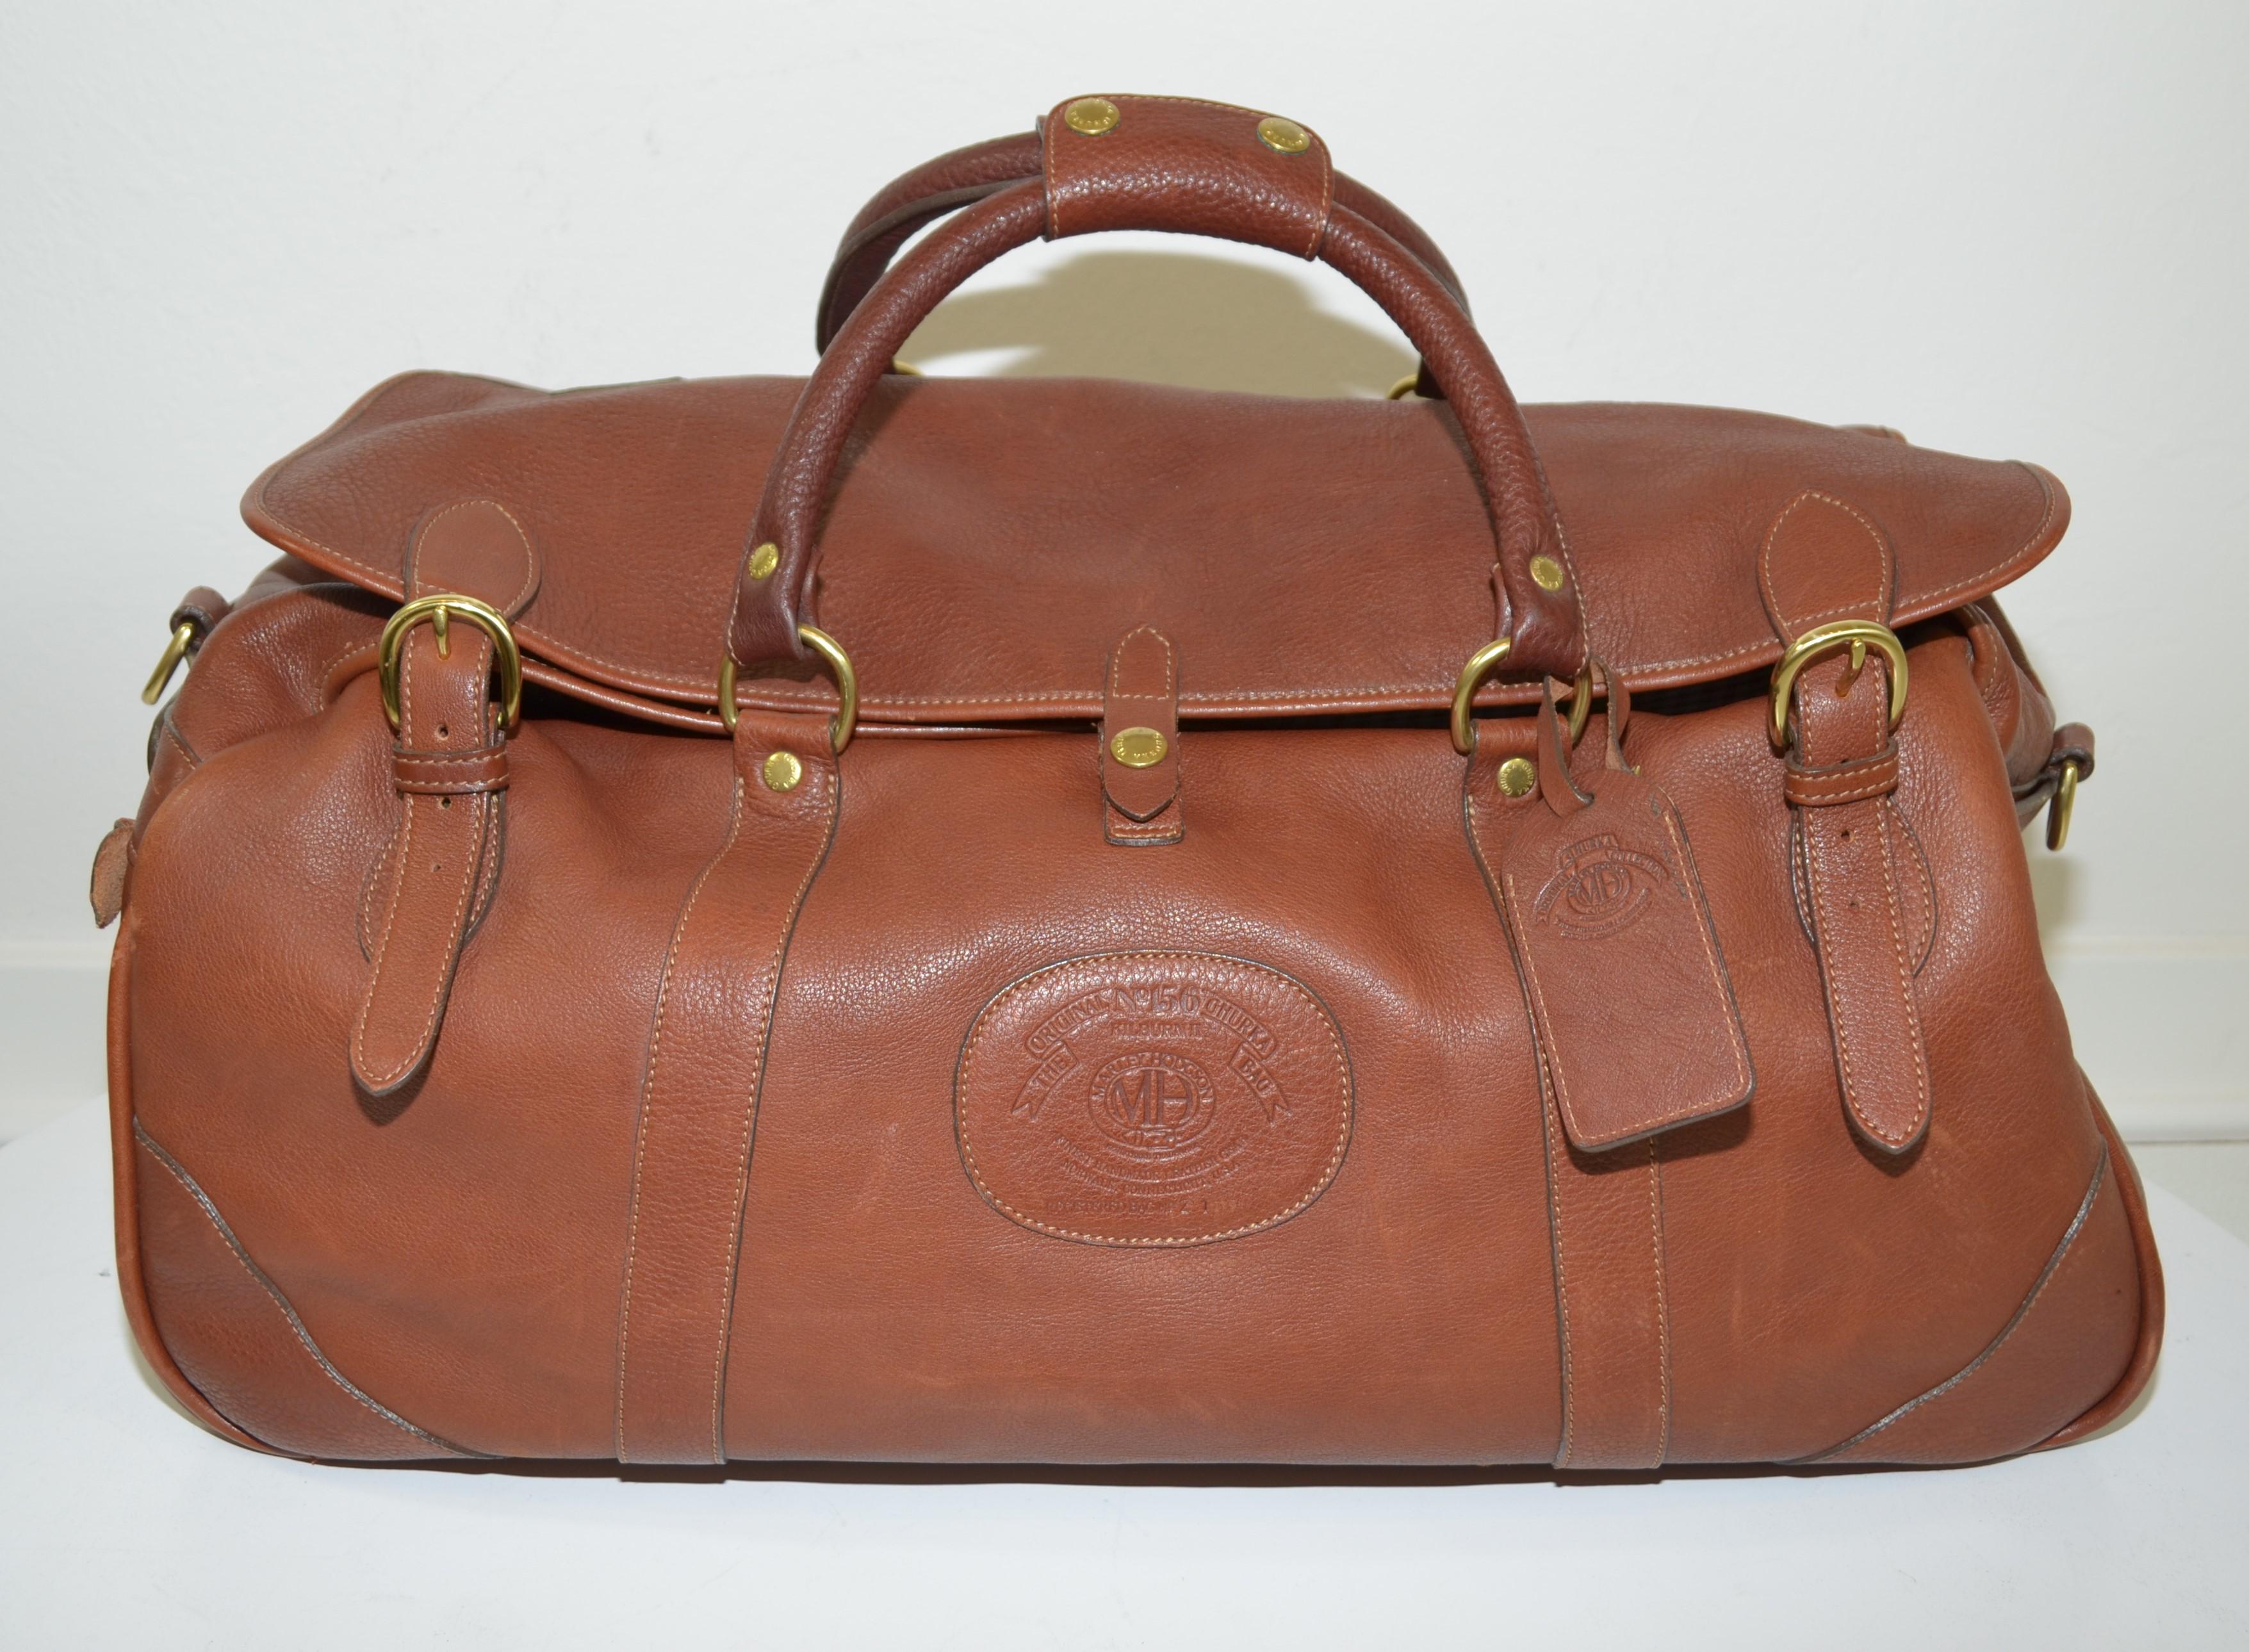 Ghurka Vintage Cavalier Leather Duffel Bag with Travel Accessories -- featured in a cognac brown leather with gold-tone hardware. Duffel bag has a top dual zippered closure, flaps with velcro, and rolled top handles. Interior is fully lined in a